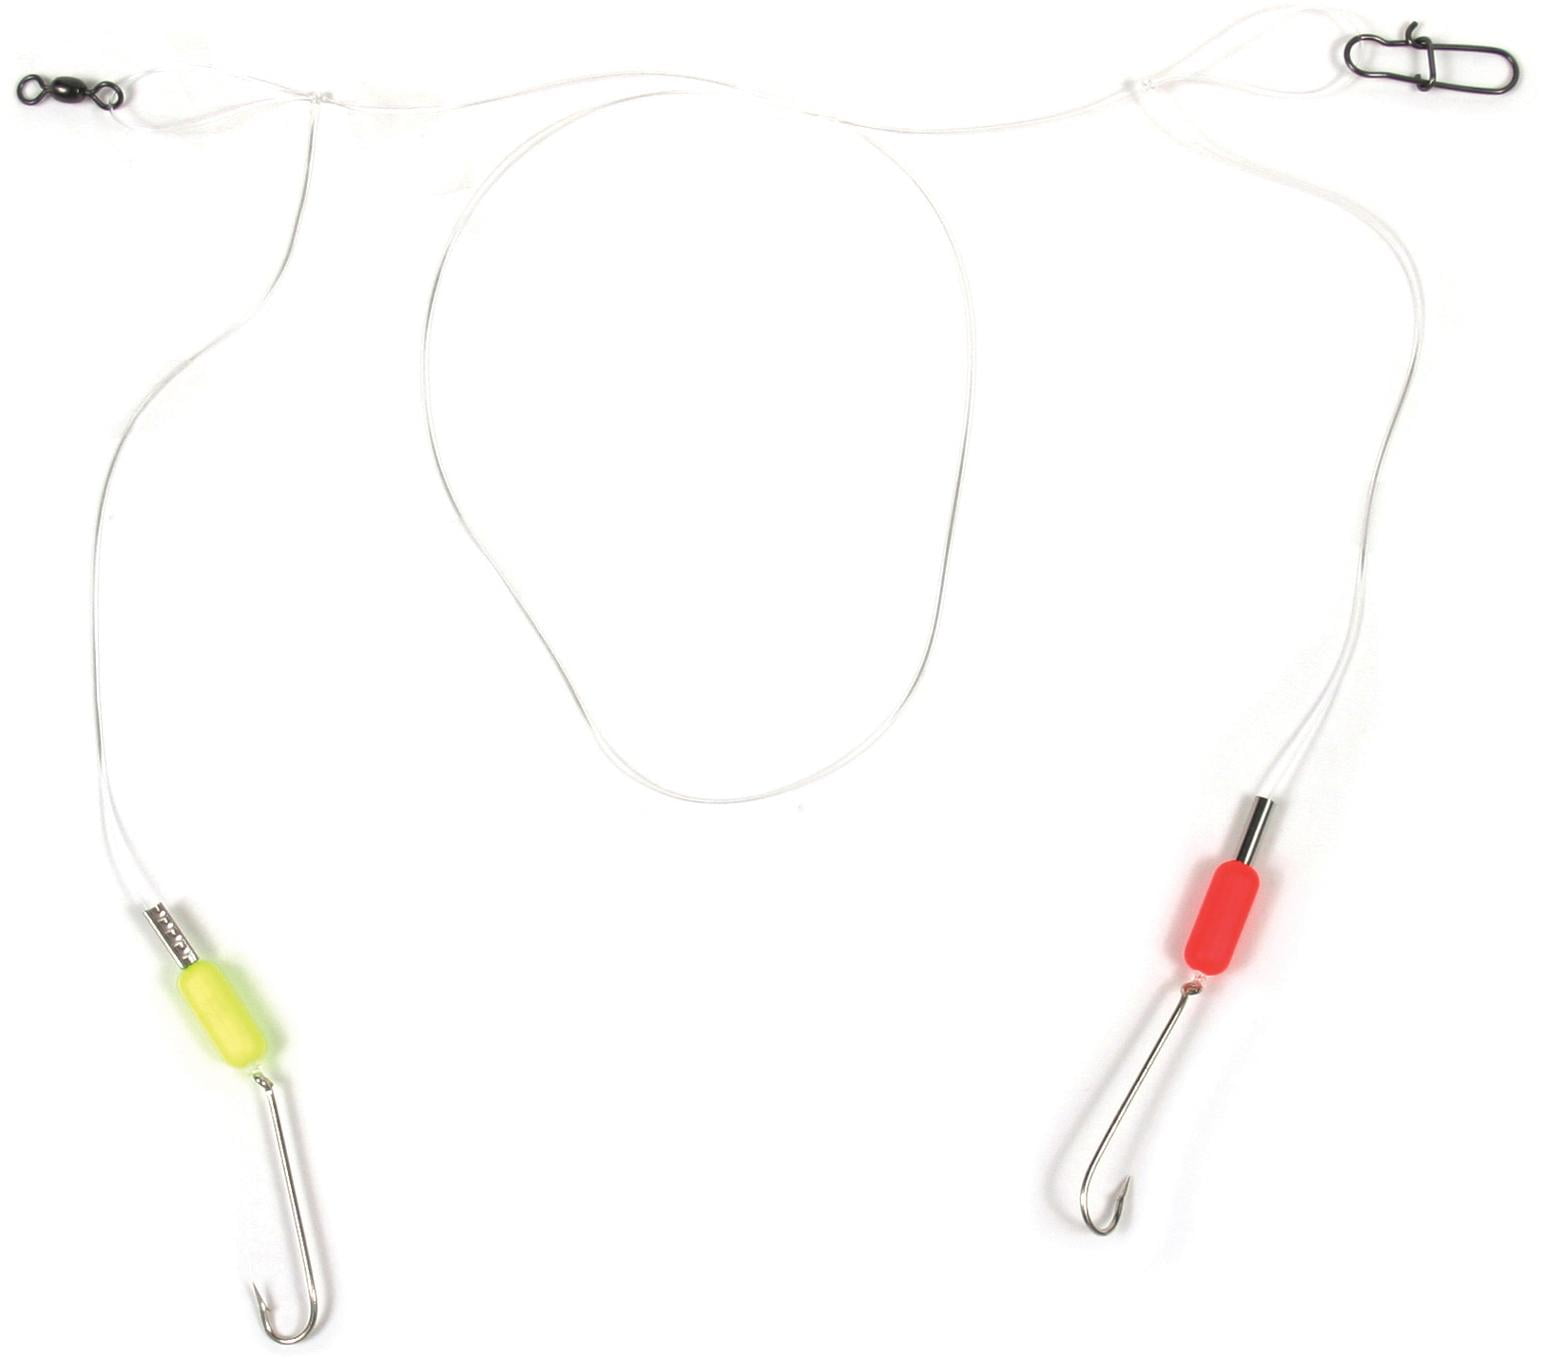 Sea Striker SSSKF-3 Spot/Whiting/Pompano Rig, #6 Pacific Bass Hooks,  Red/Yellow Floats 